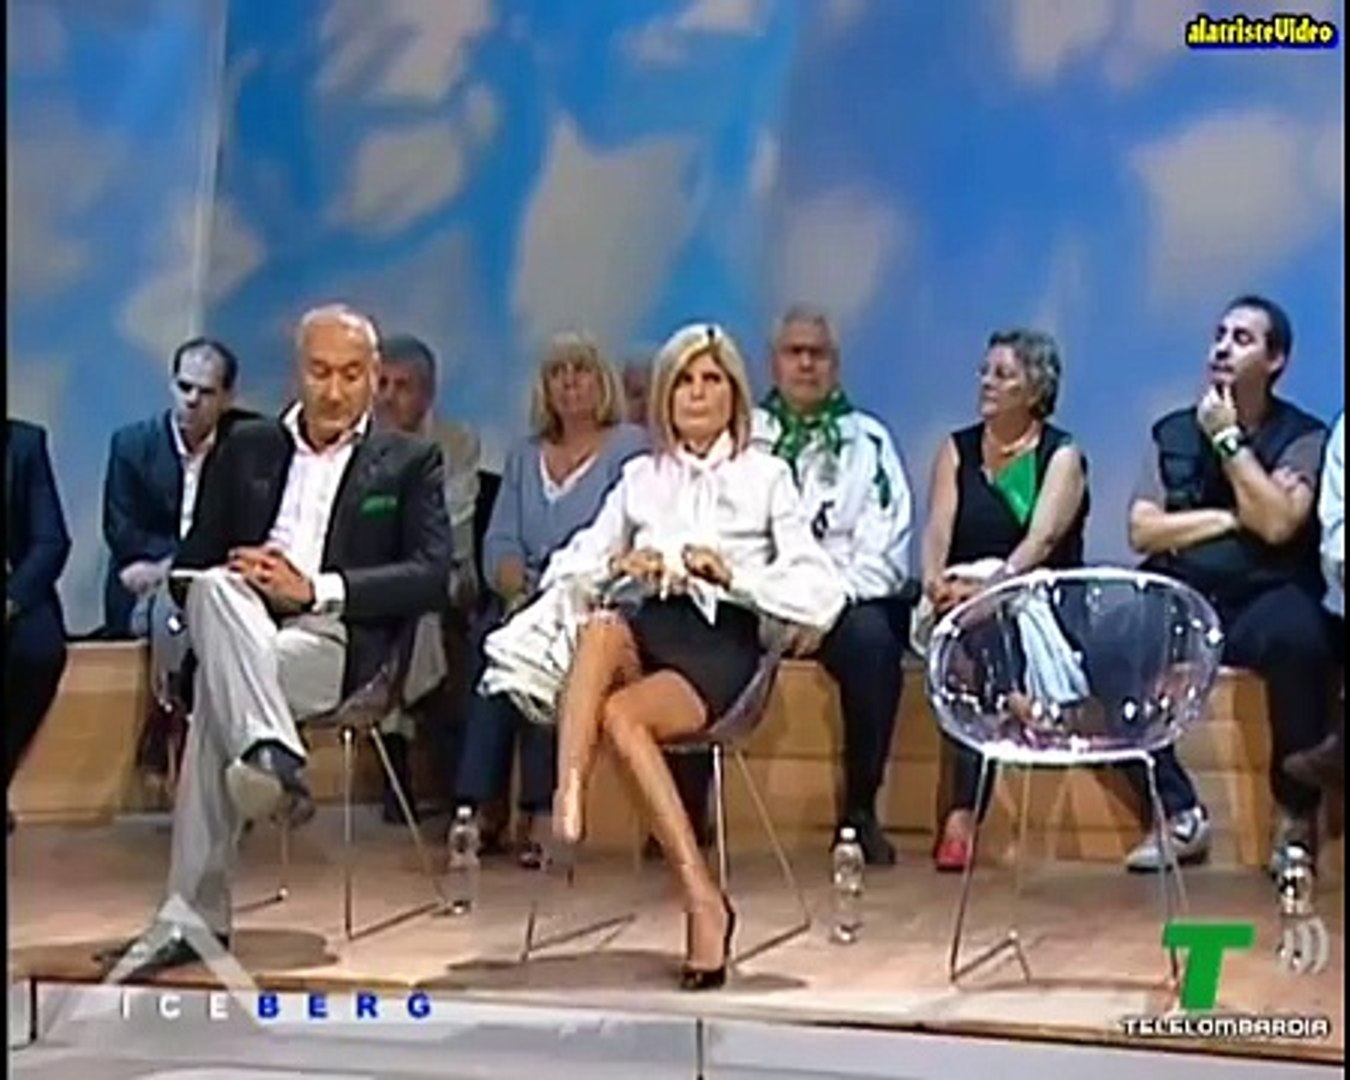 On. Laura Ravetto scoscia a telelombardia - video Dailymotion